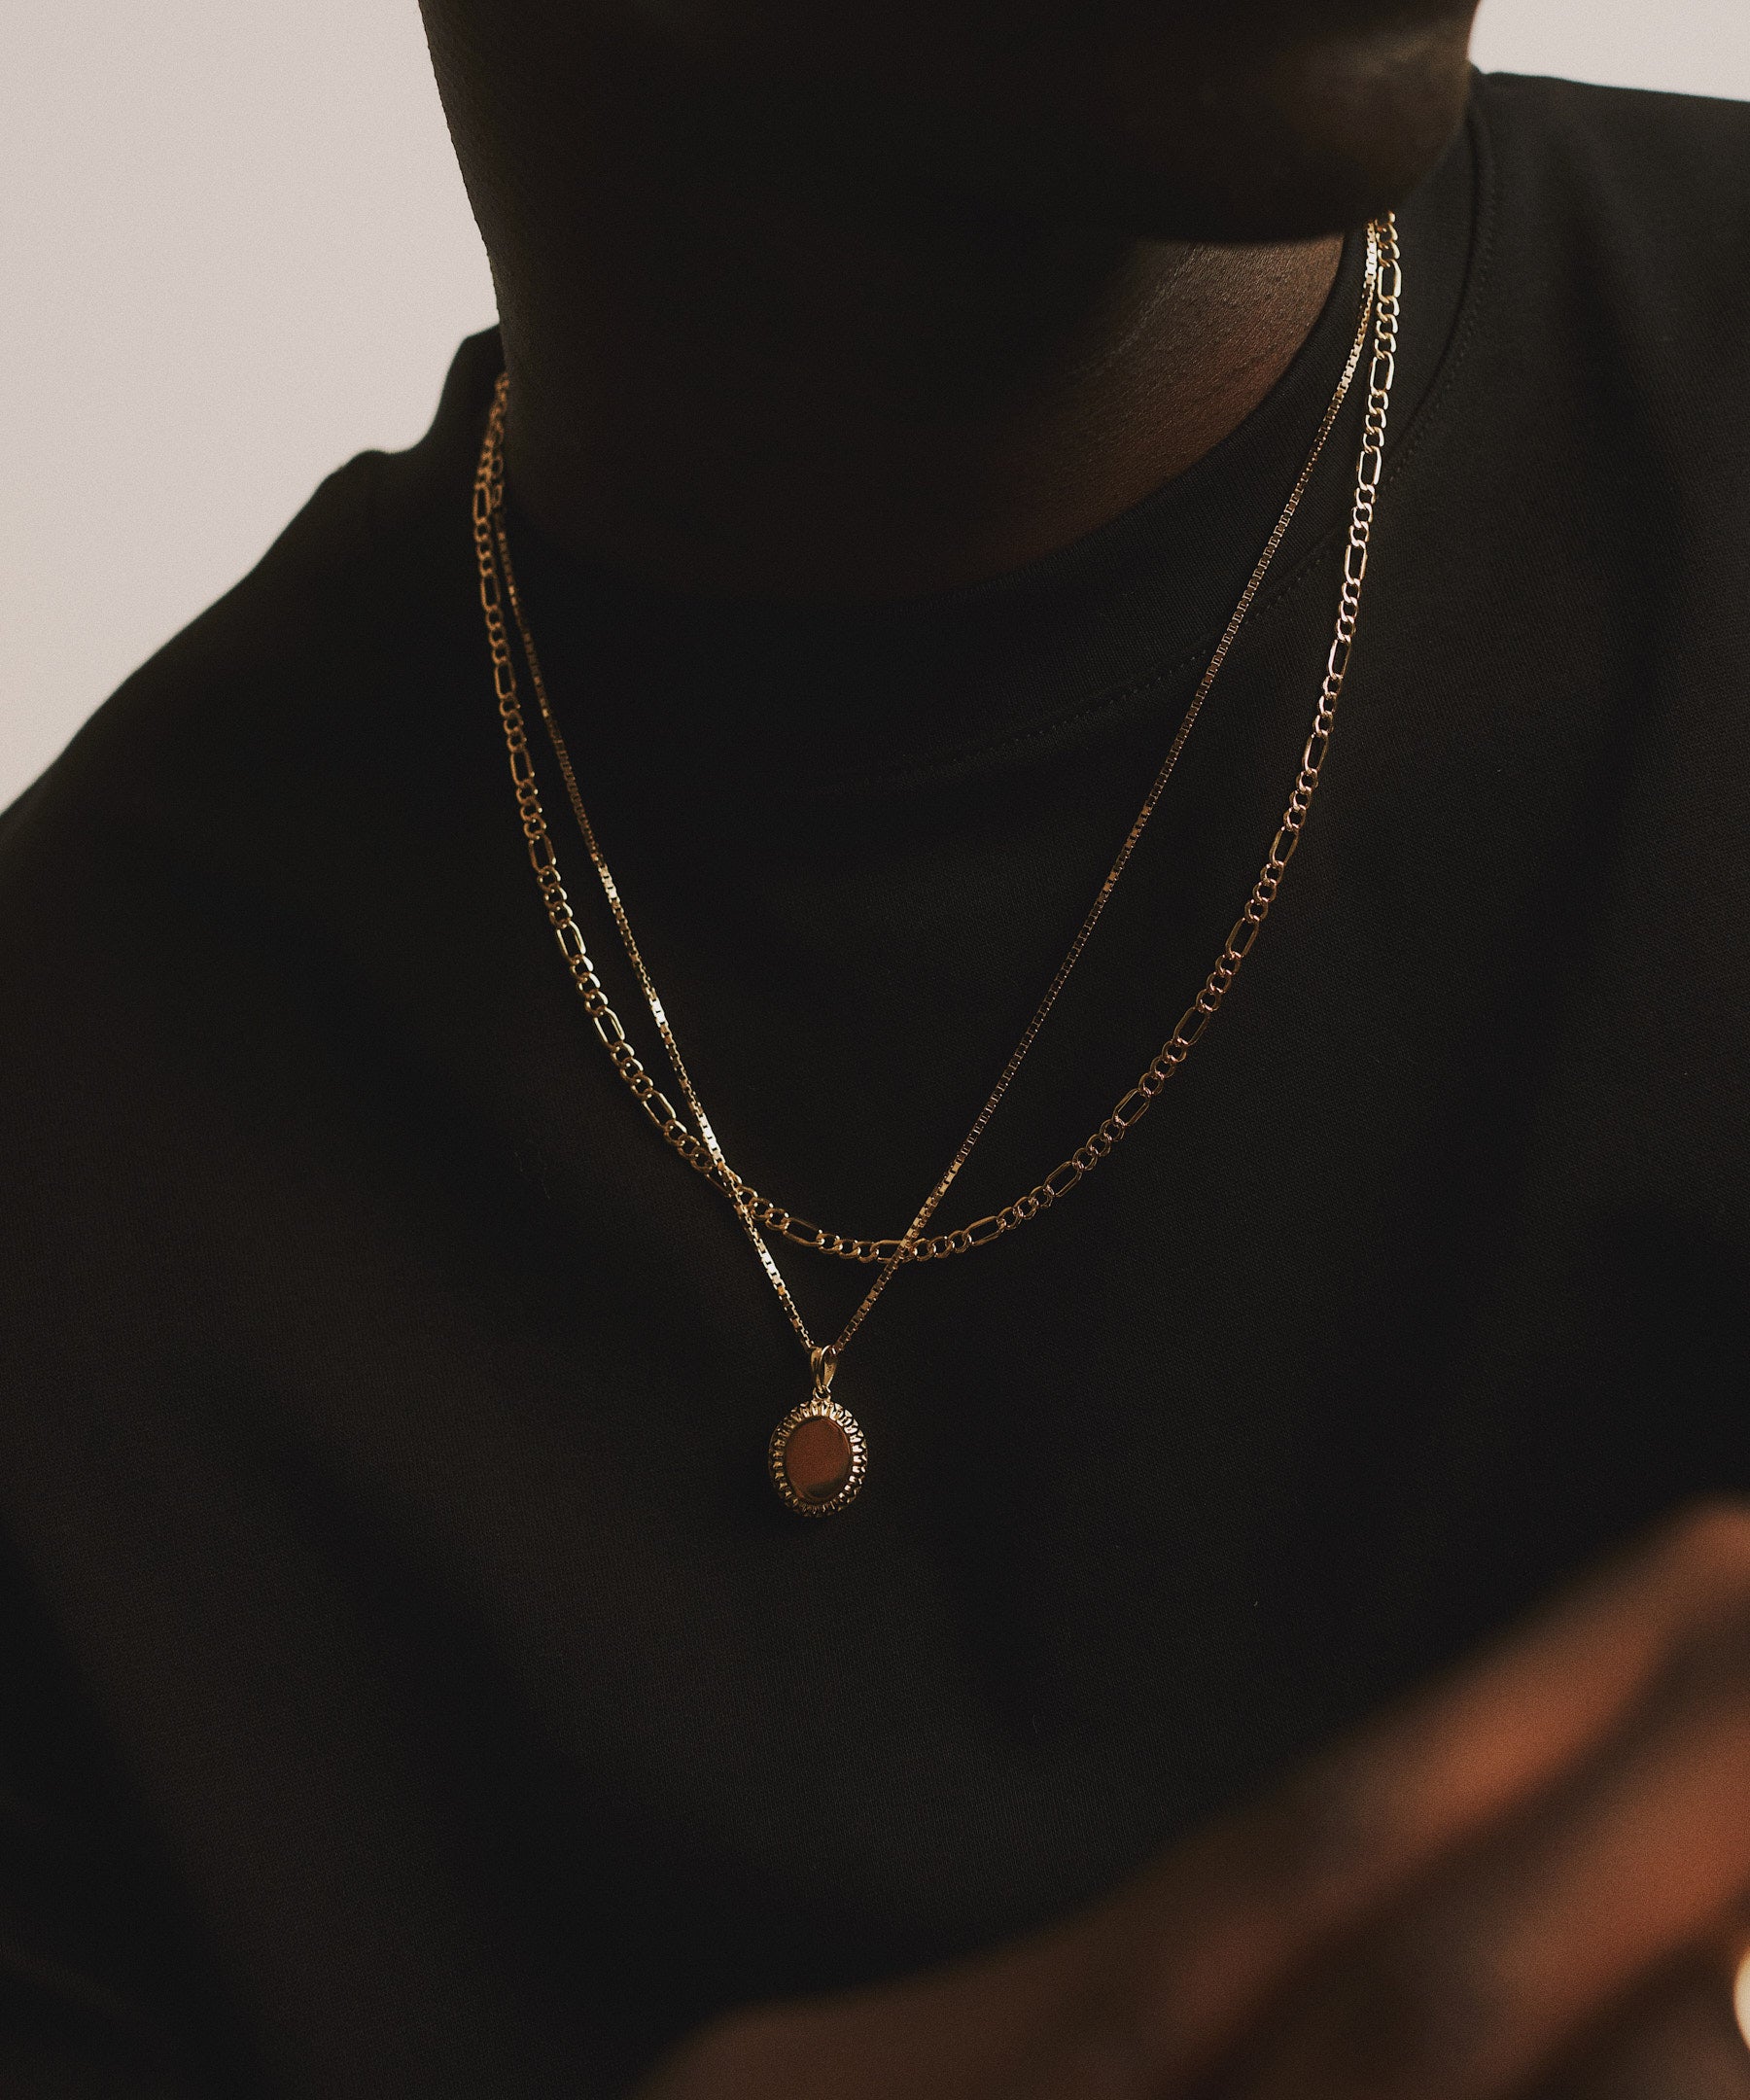 Their Jewelry – Genderless Designs made with Recycled Materials